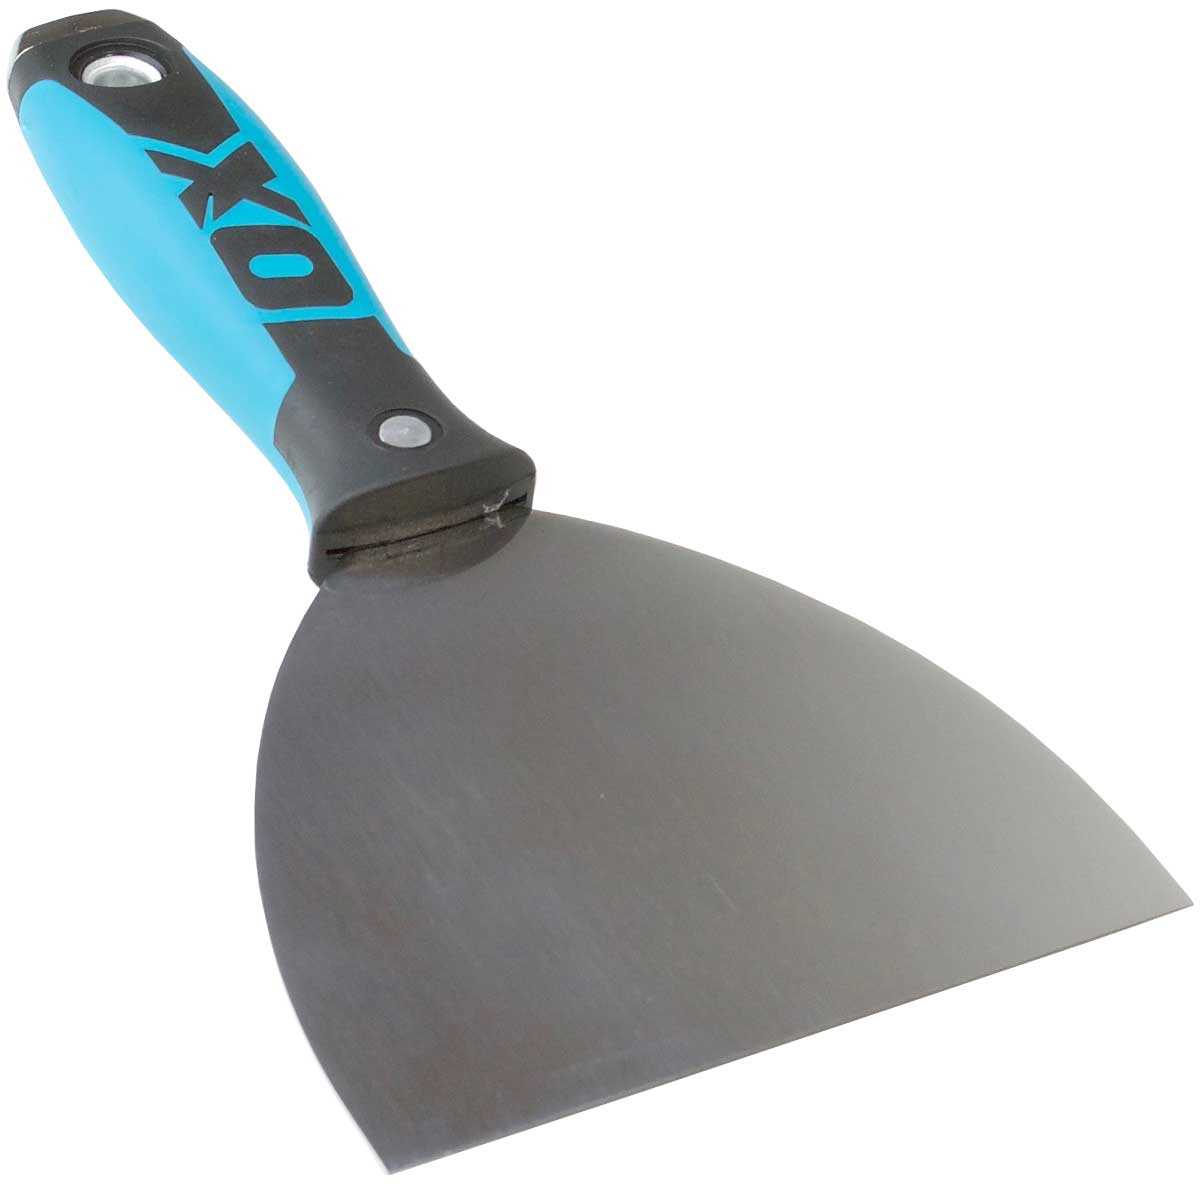 OX Pro 5" Putty Joint Knife